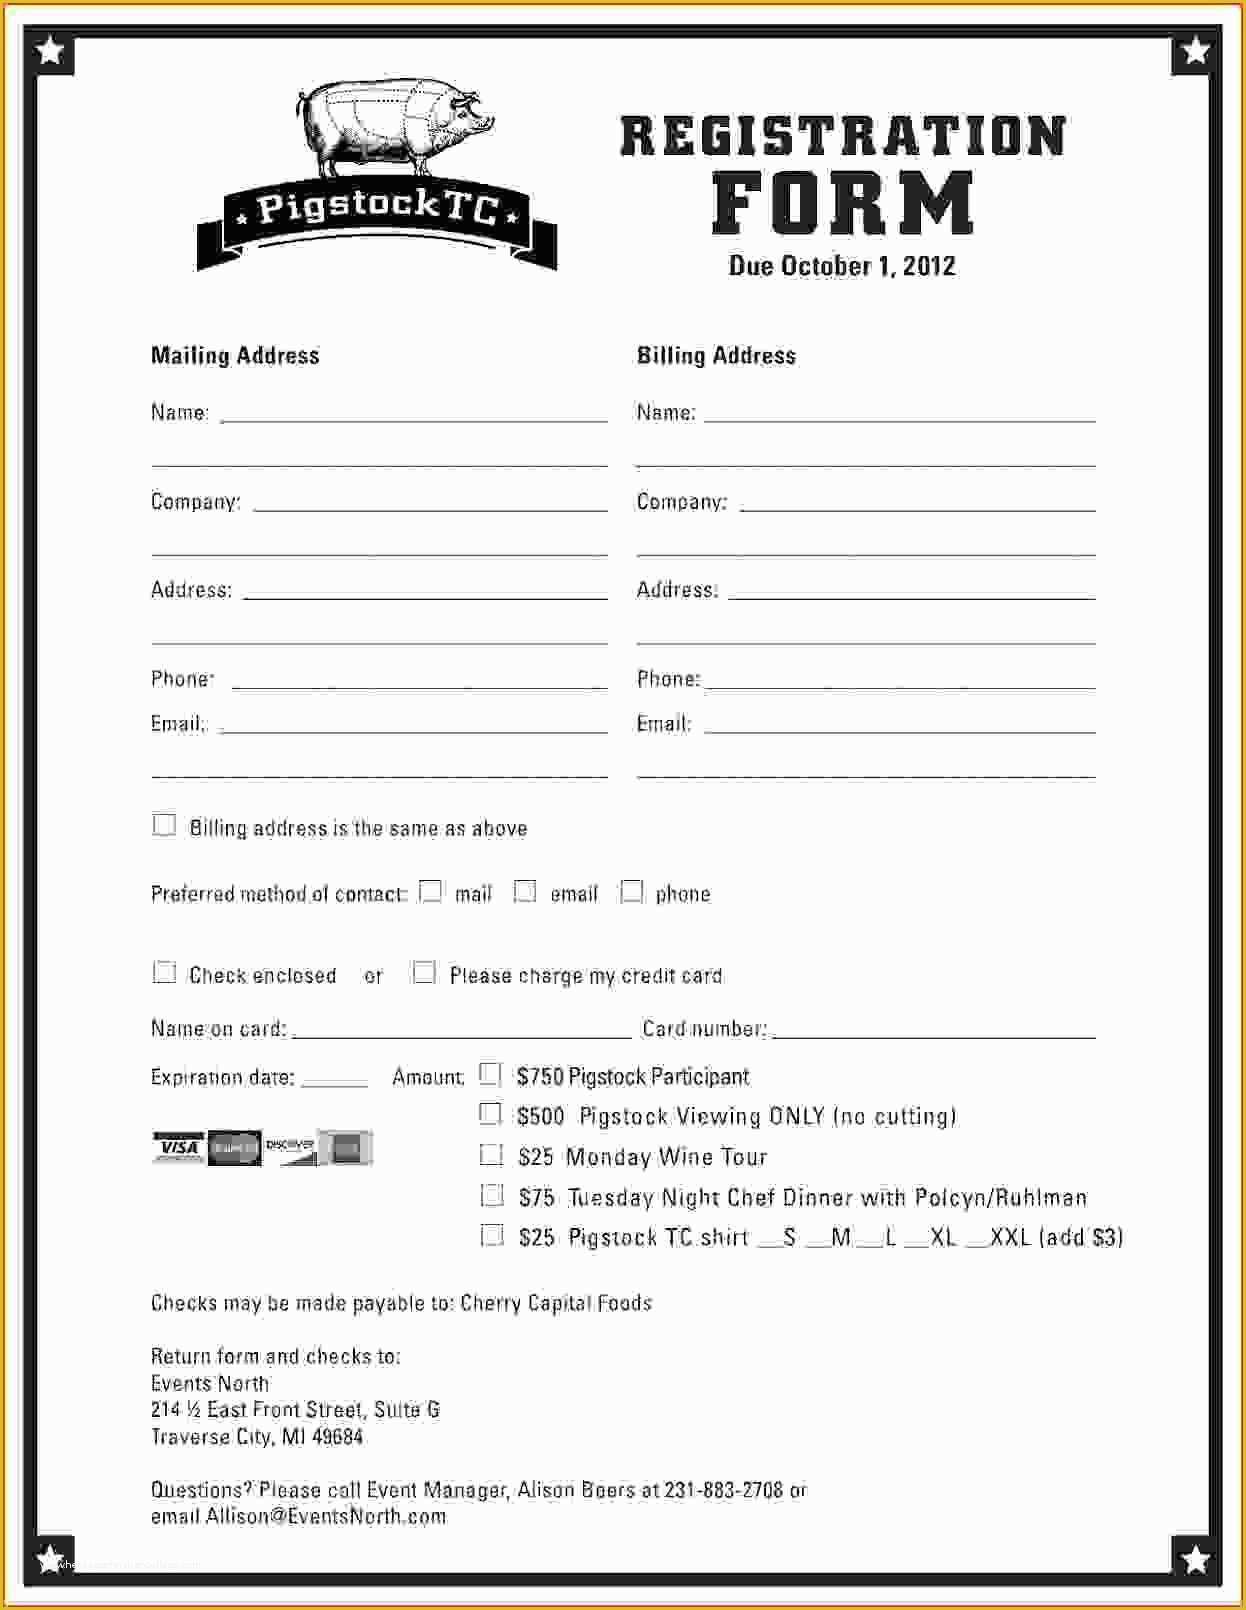 Free Registration form Template Of Image Result for Vendor Registration form Template